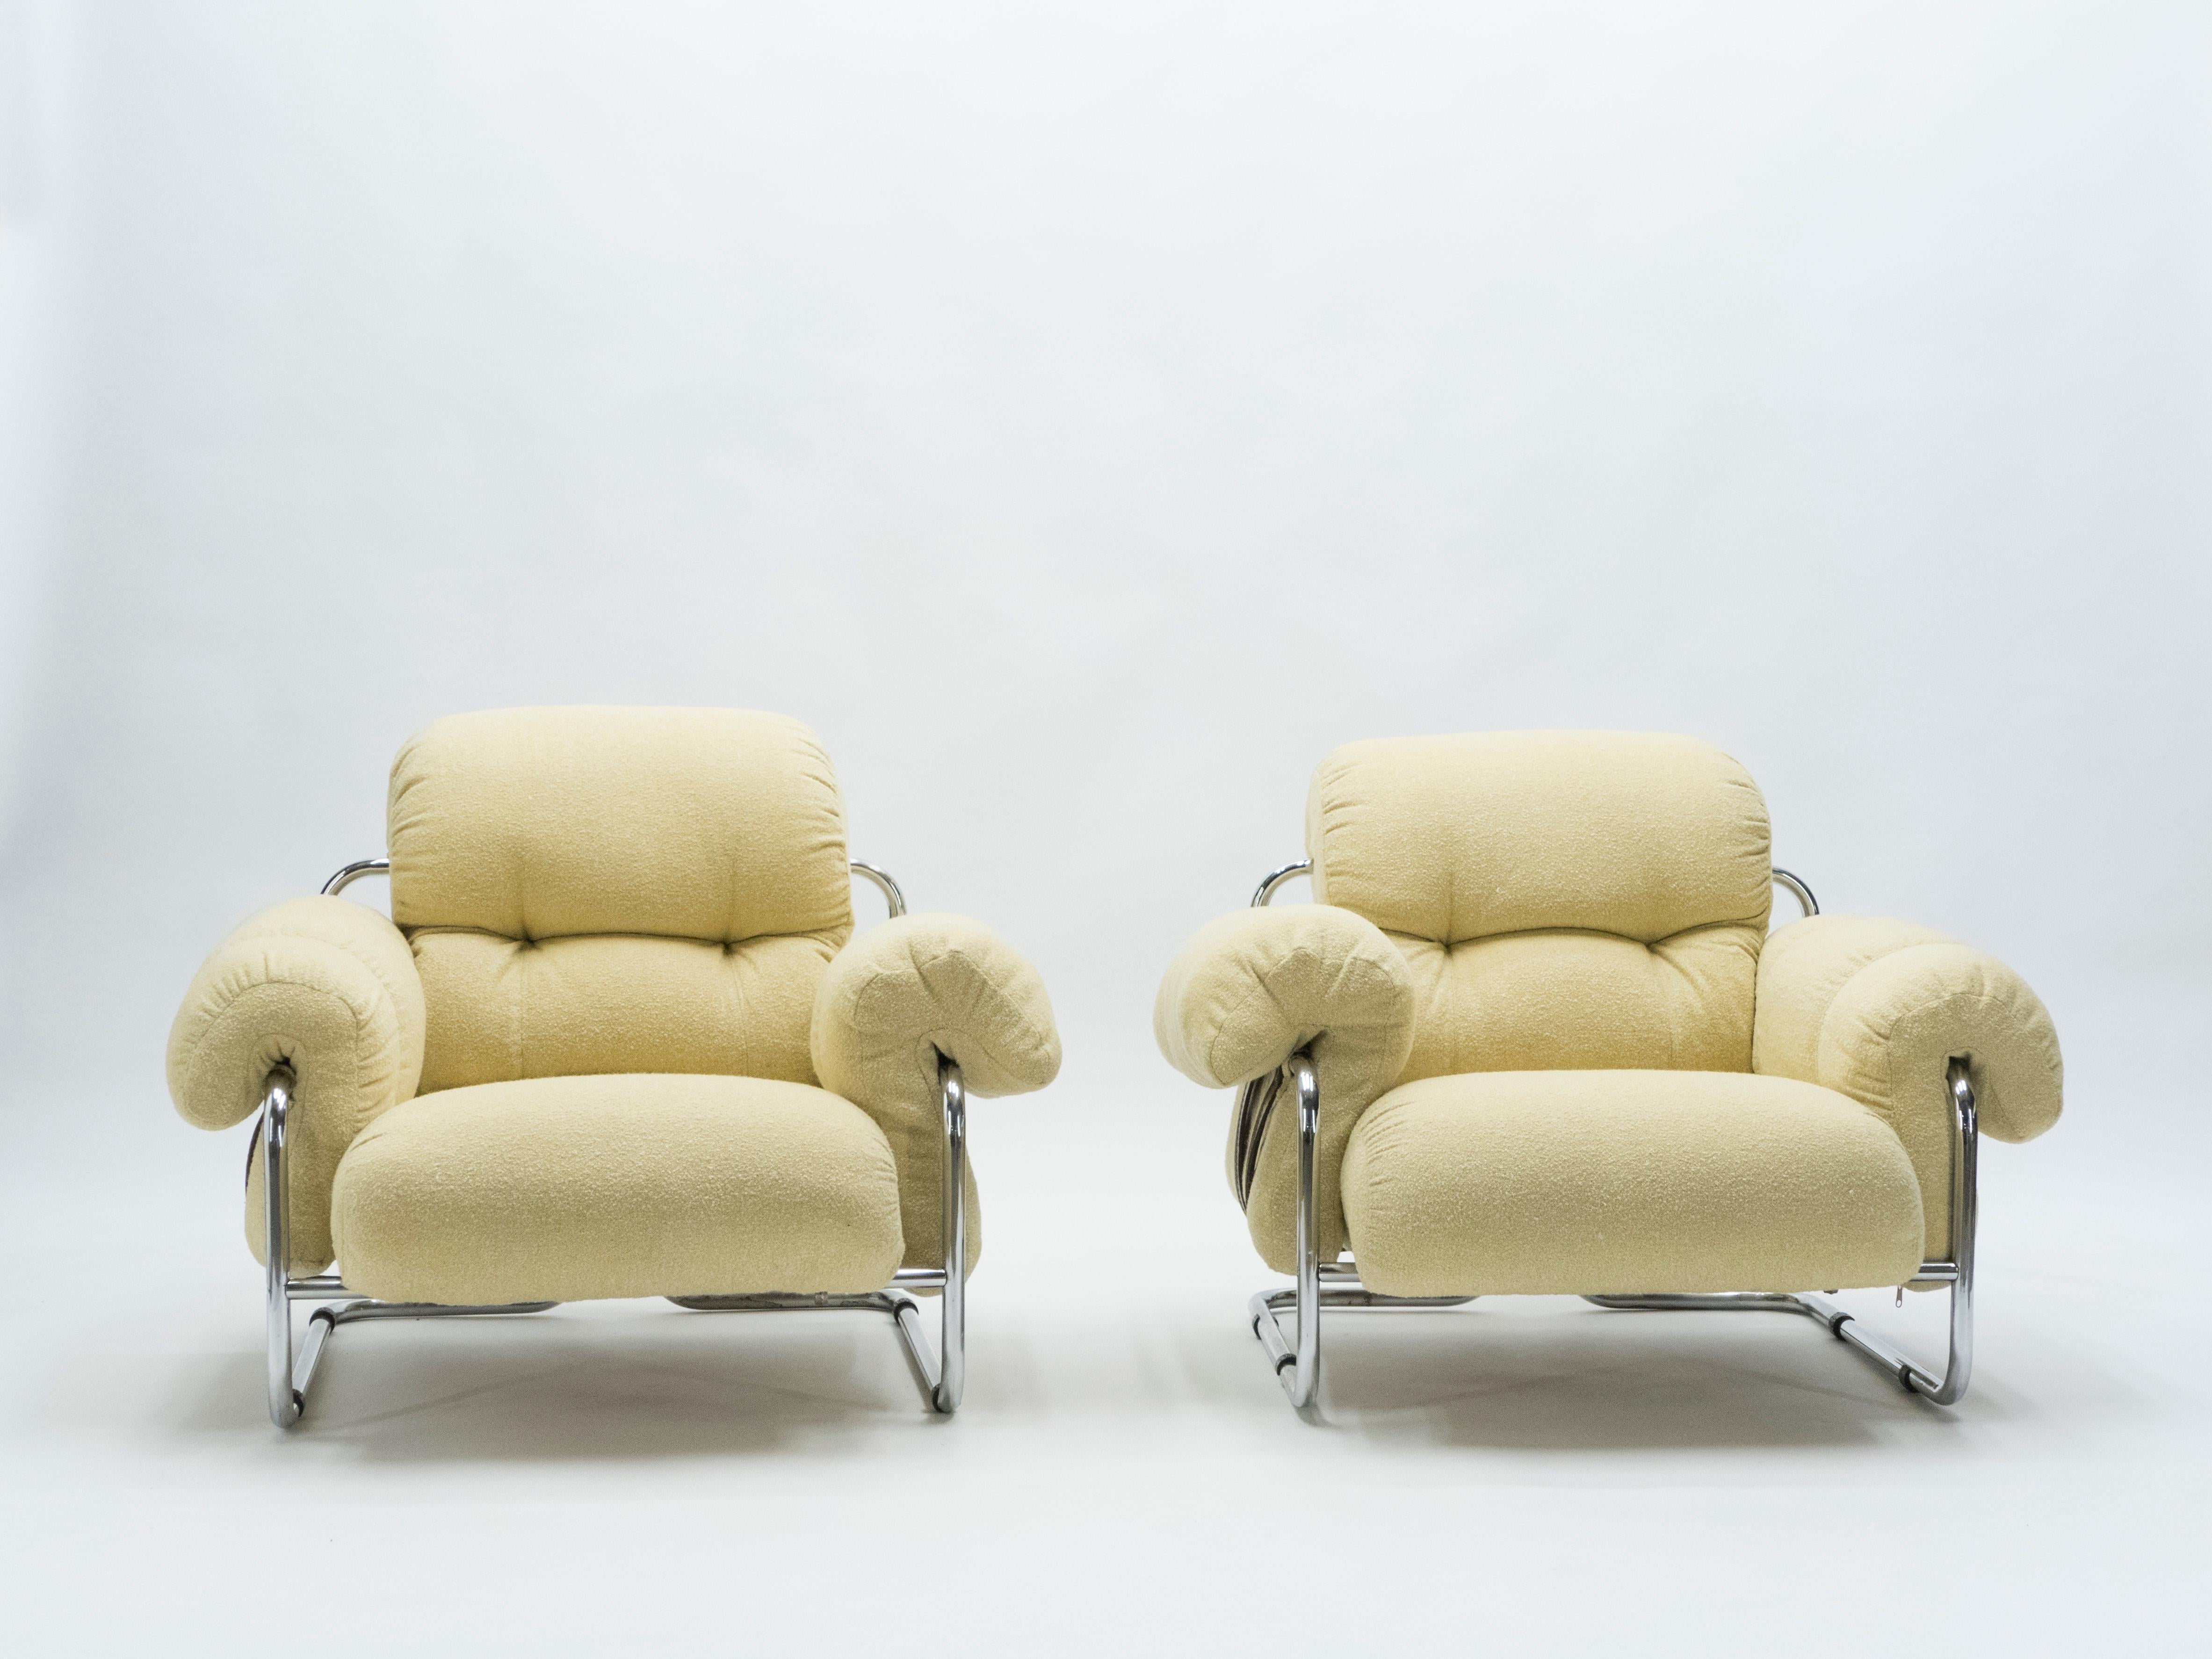 Leather Rare Pair of Italian “Tucroma” Armchairs by Guido Faleschini for Mariani, 1970s